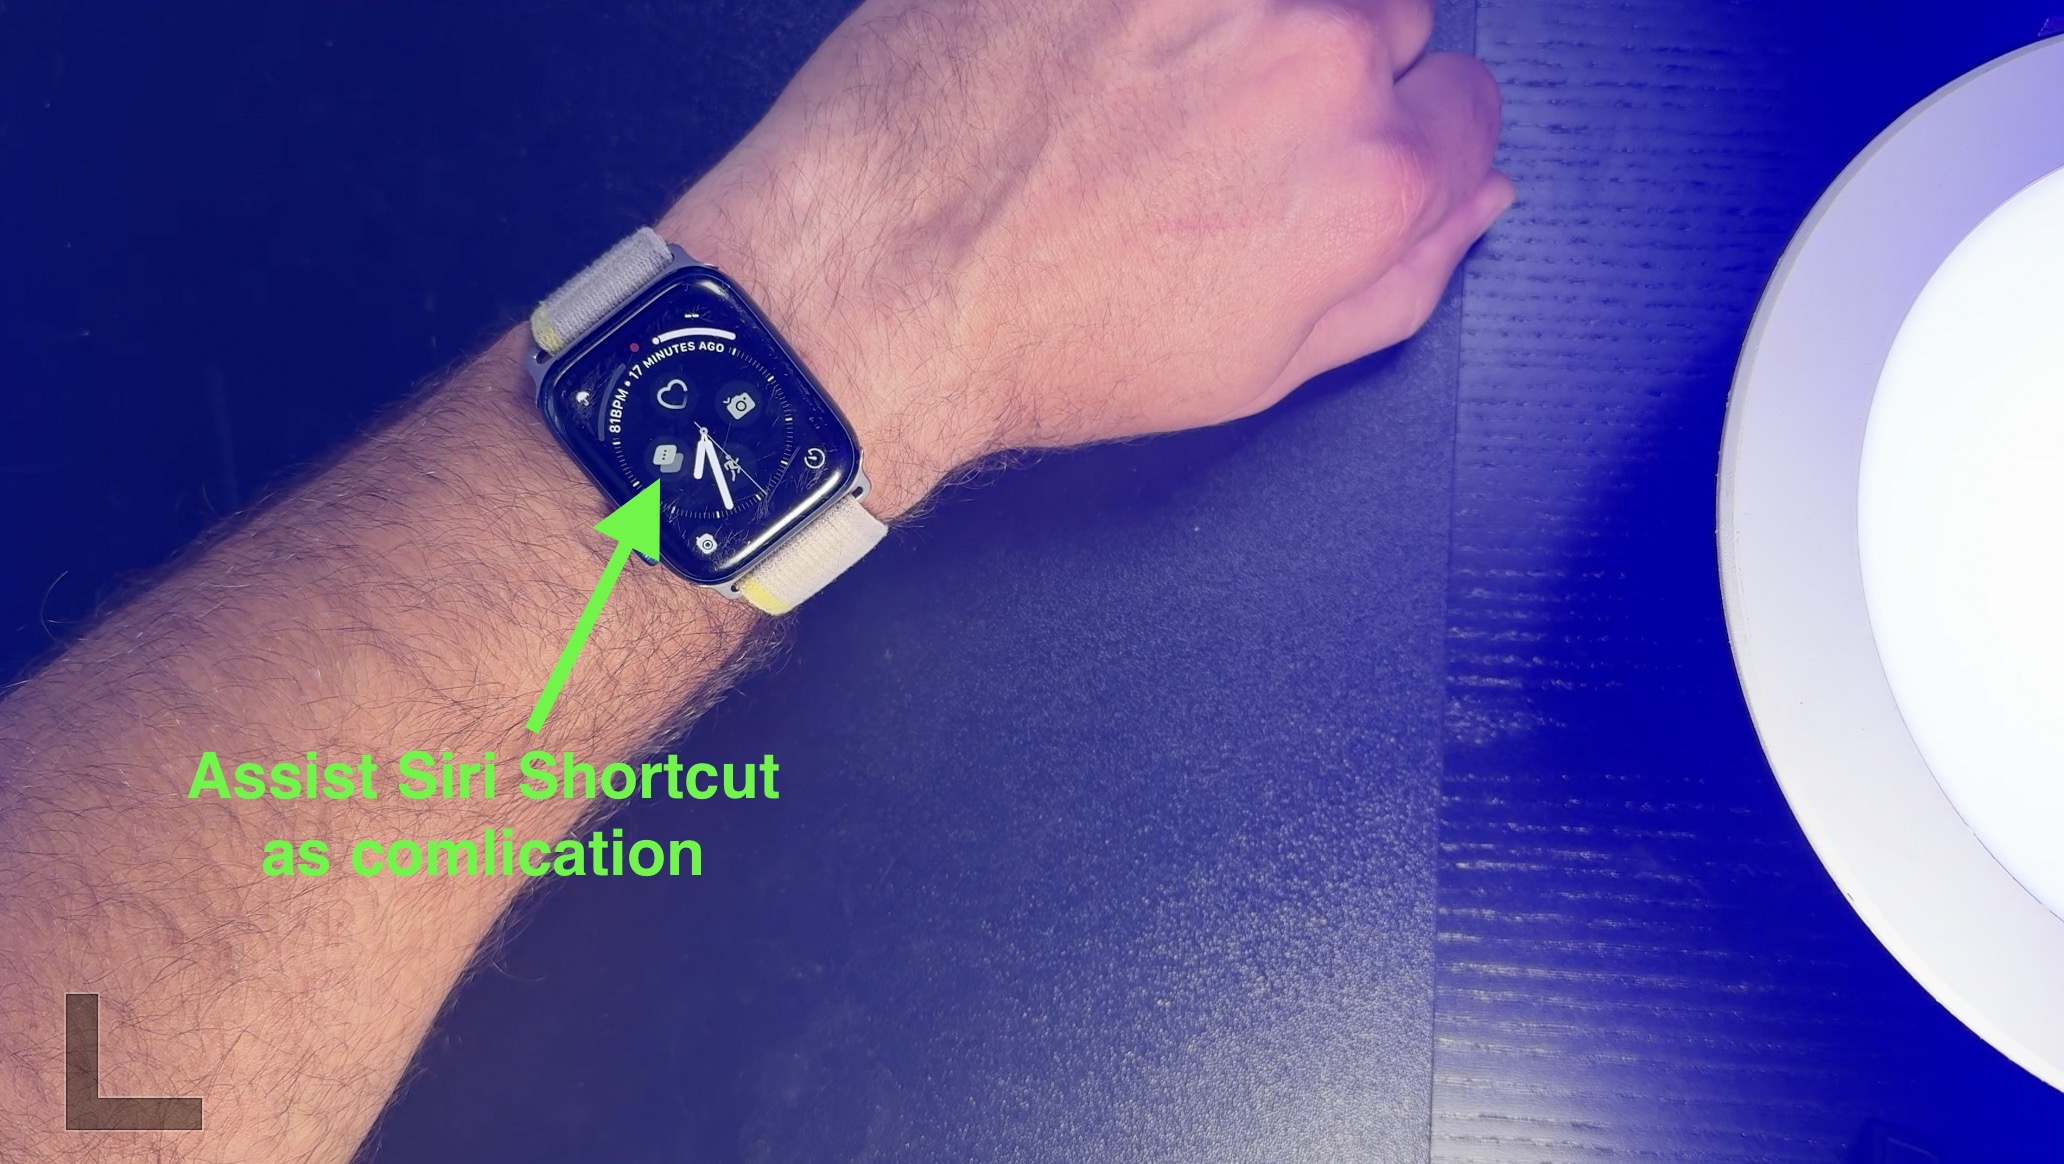 You can add such complication on your watch face but it is currently useless as it involve a lot of tapping and confirmations